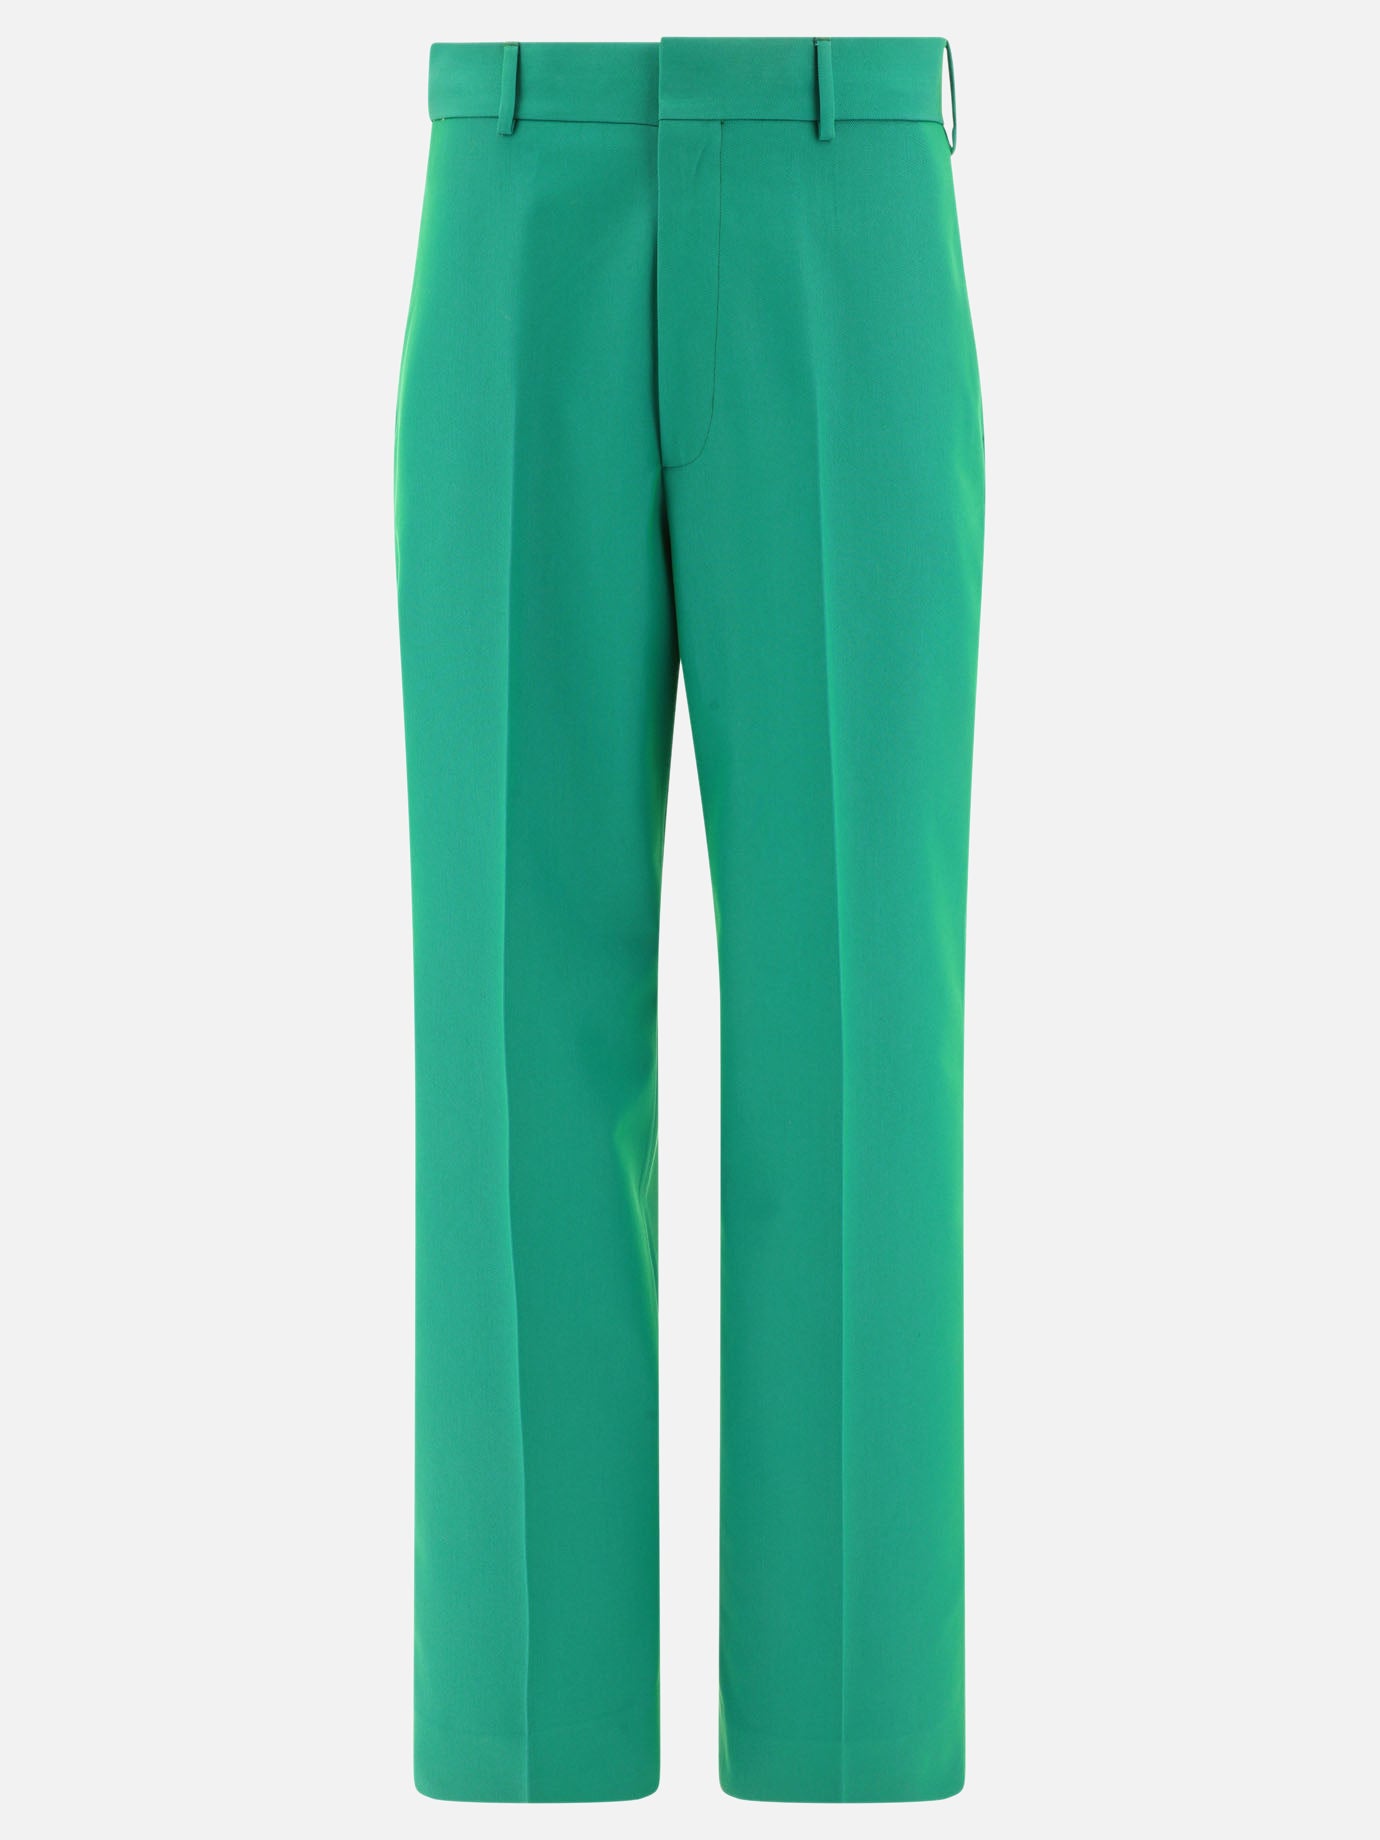 "Sonny" pleated trousers